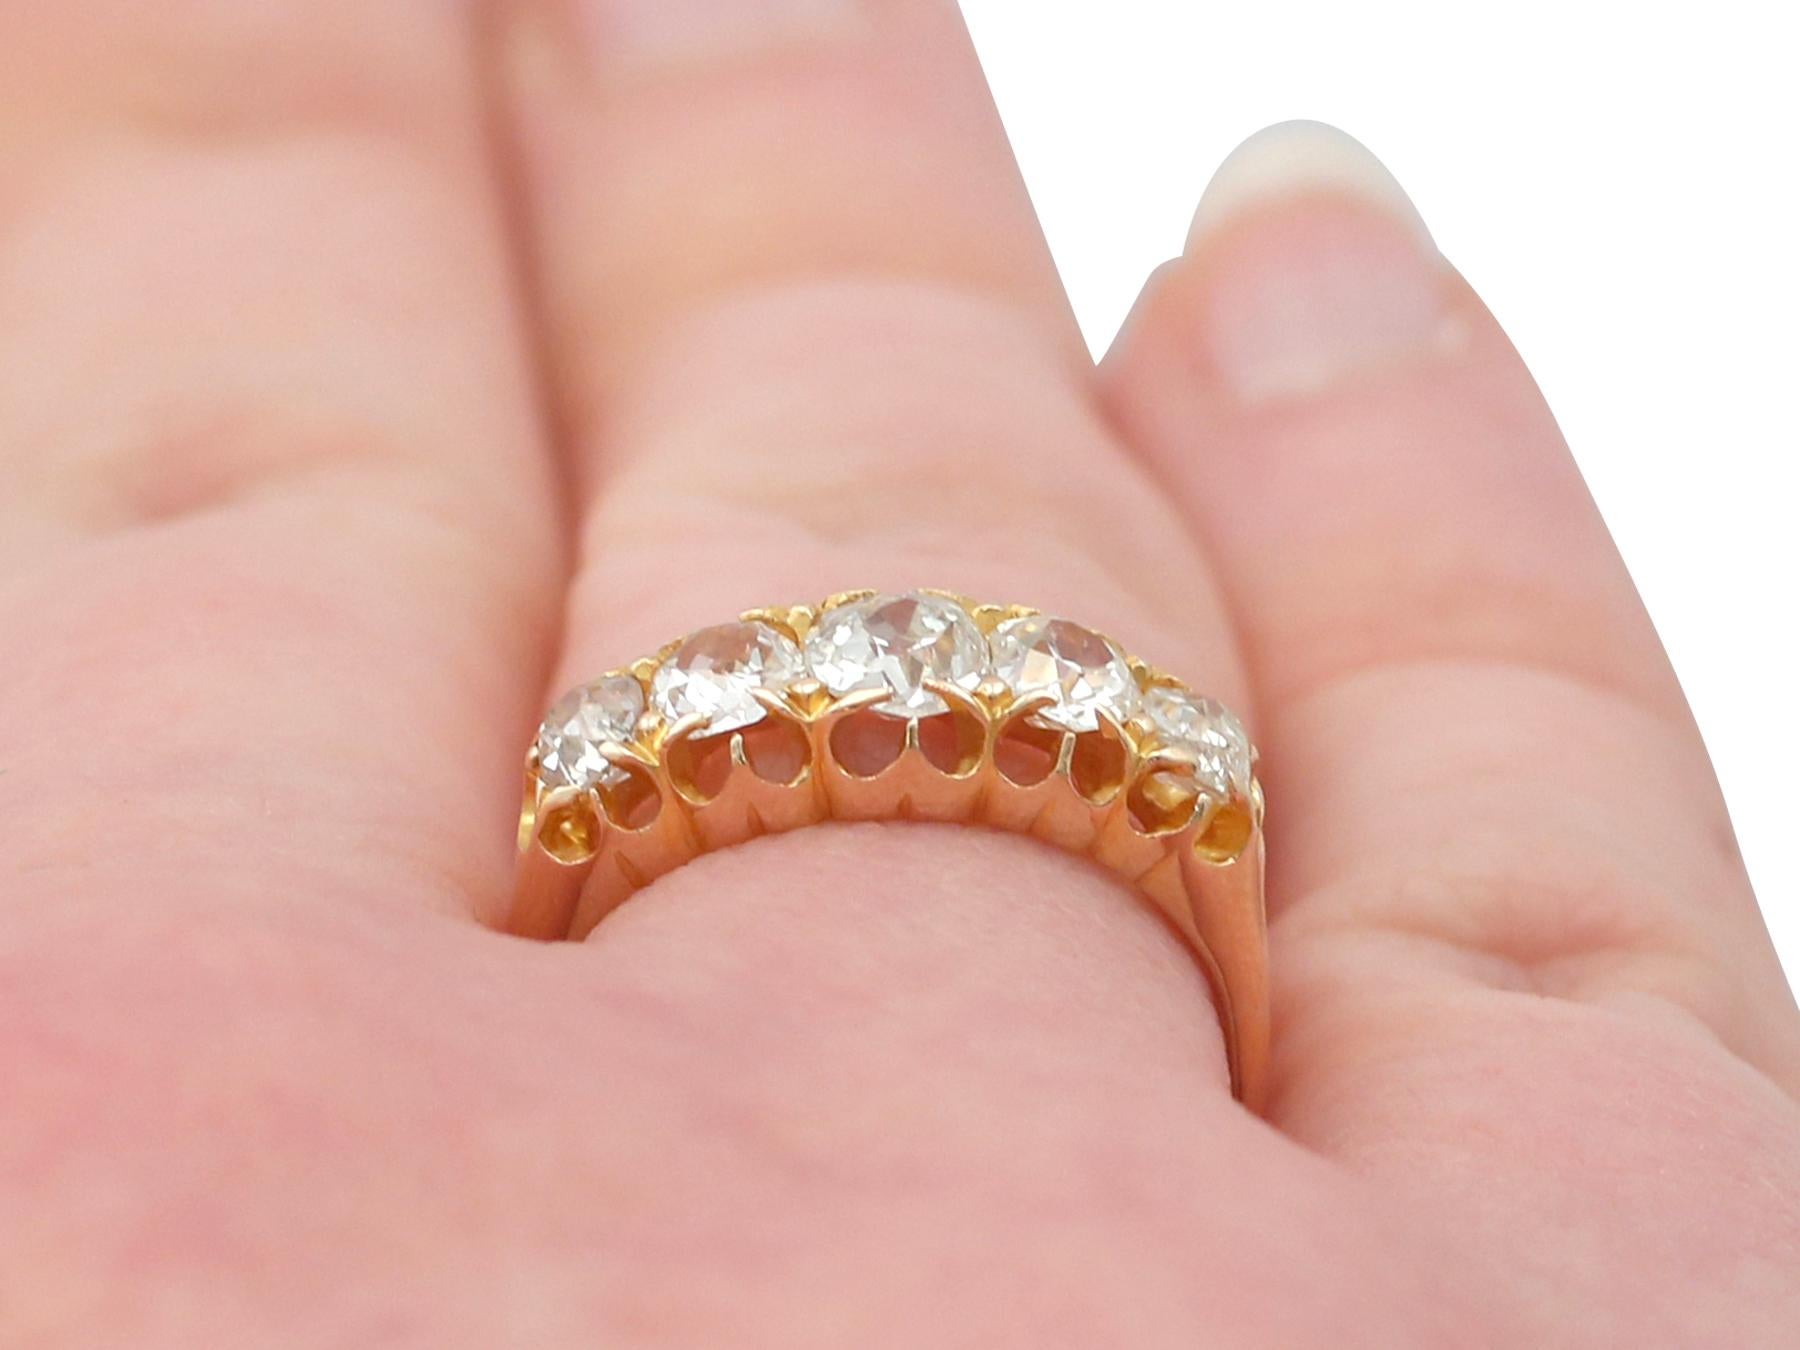 1858 Antique 1.51 Carat Diamond and Yellow Gold Five-Stone Ring 5